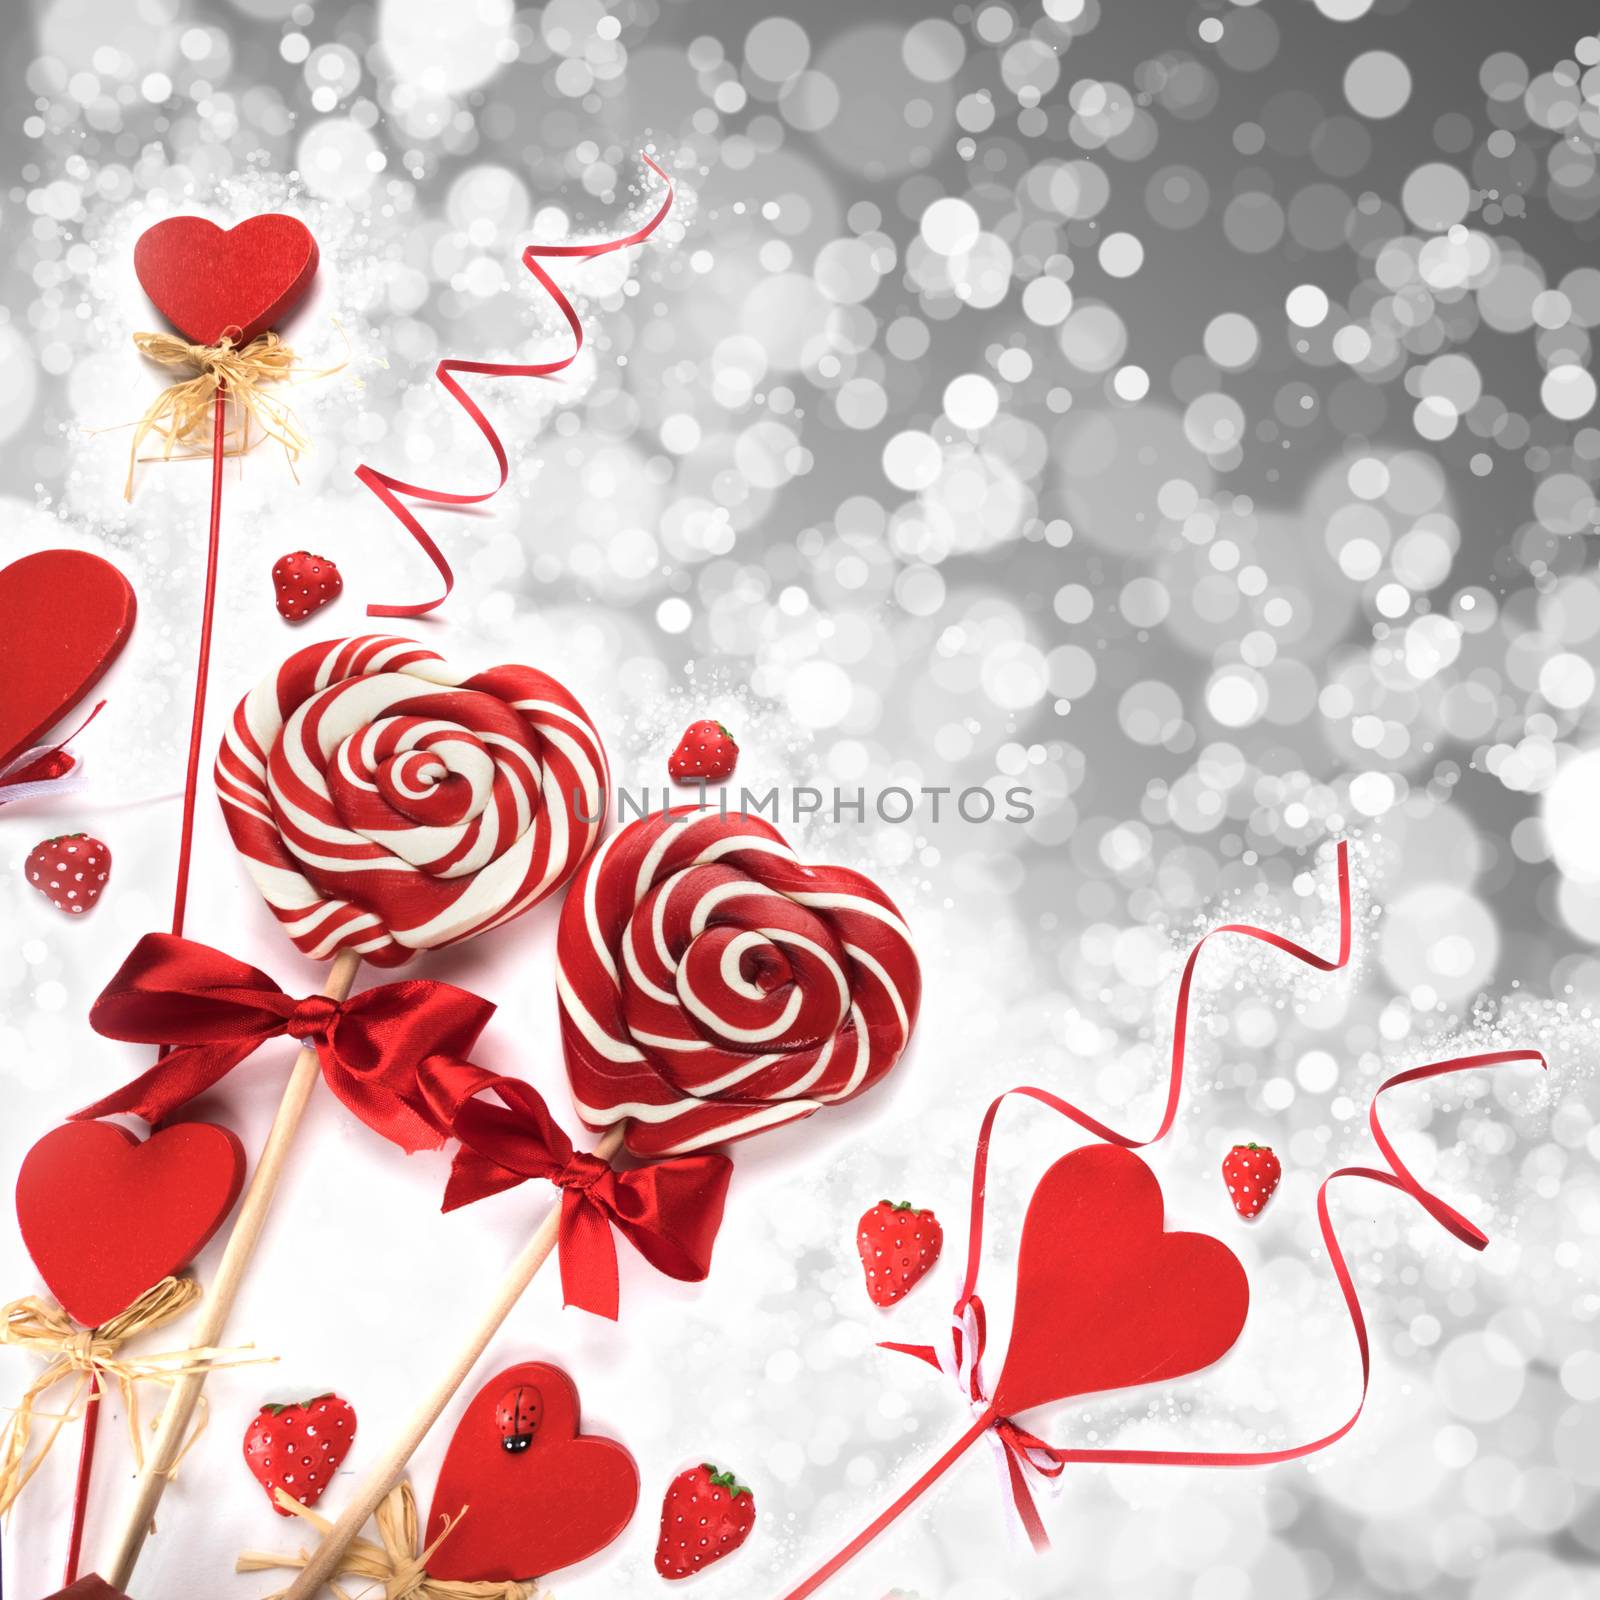 Lollipops and heart shaped decoration on silver glitter background